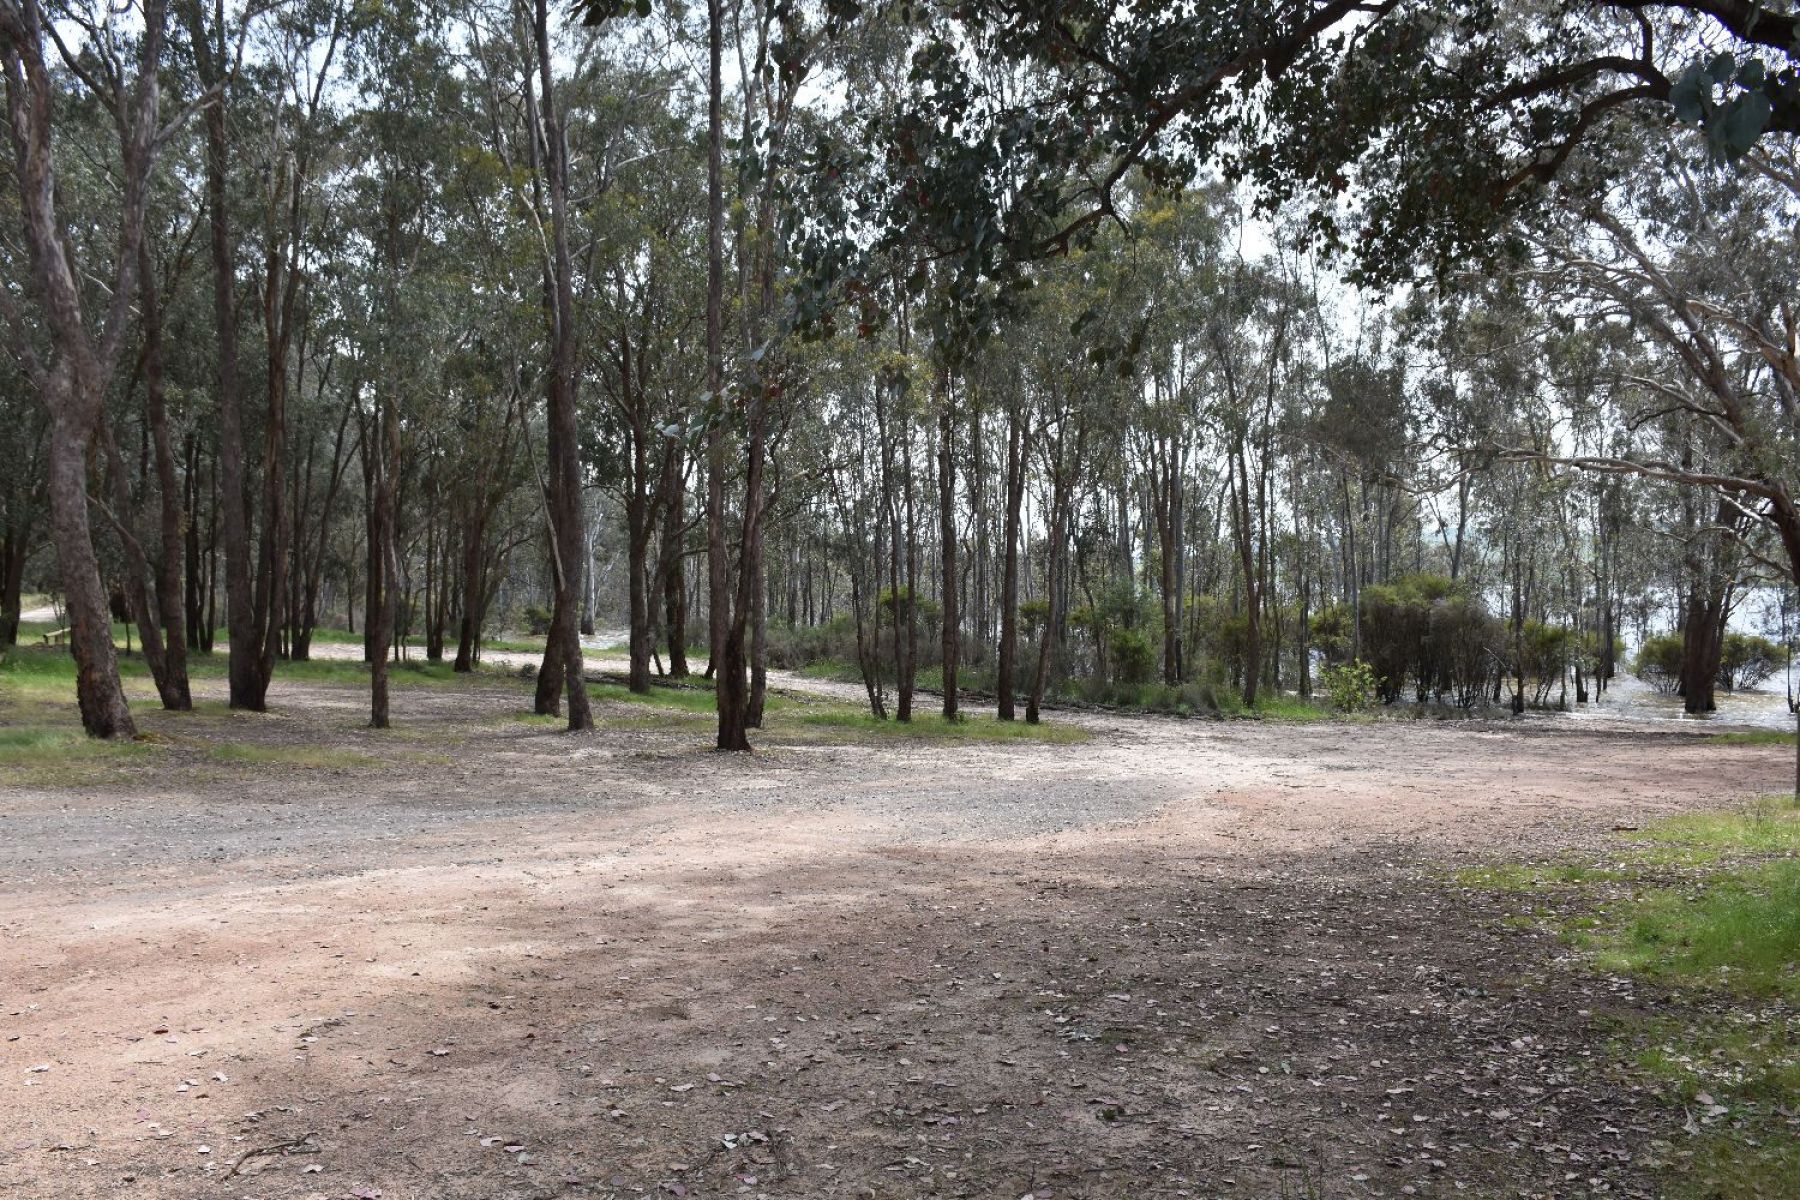 Camping area set amongst the trees, leading down to the shoreline of Lake Eildon